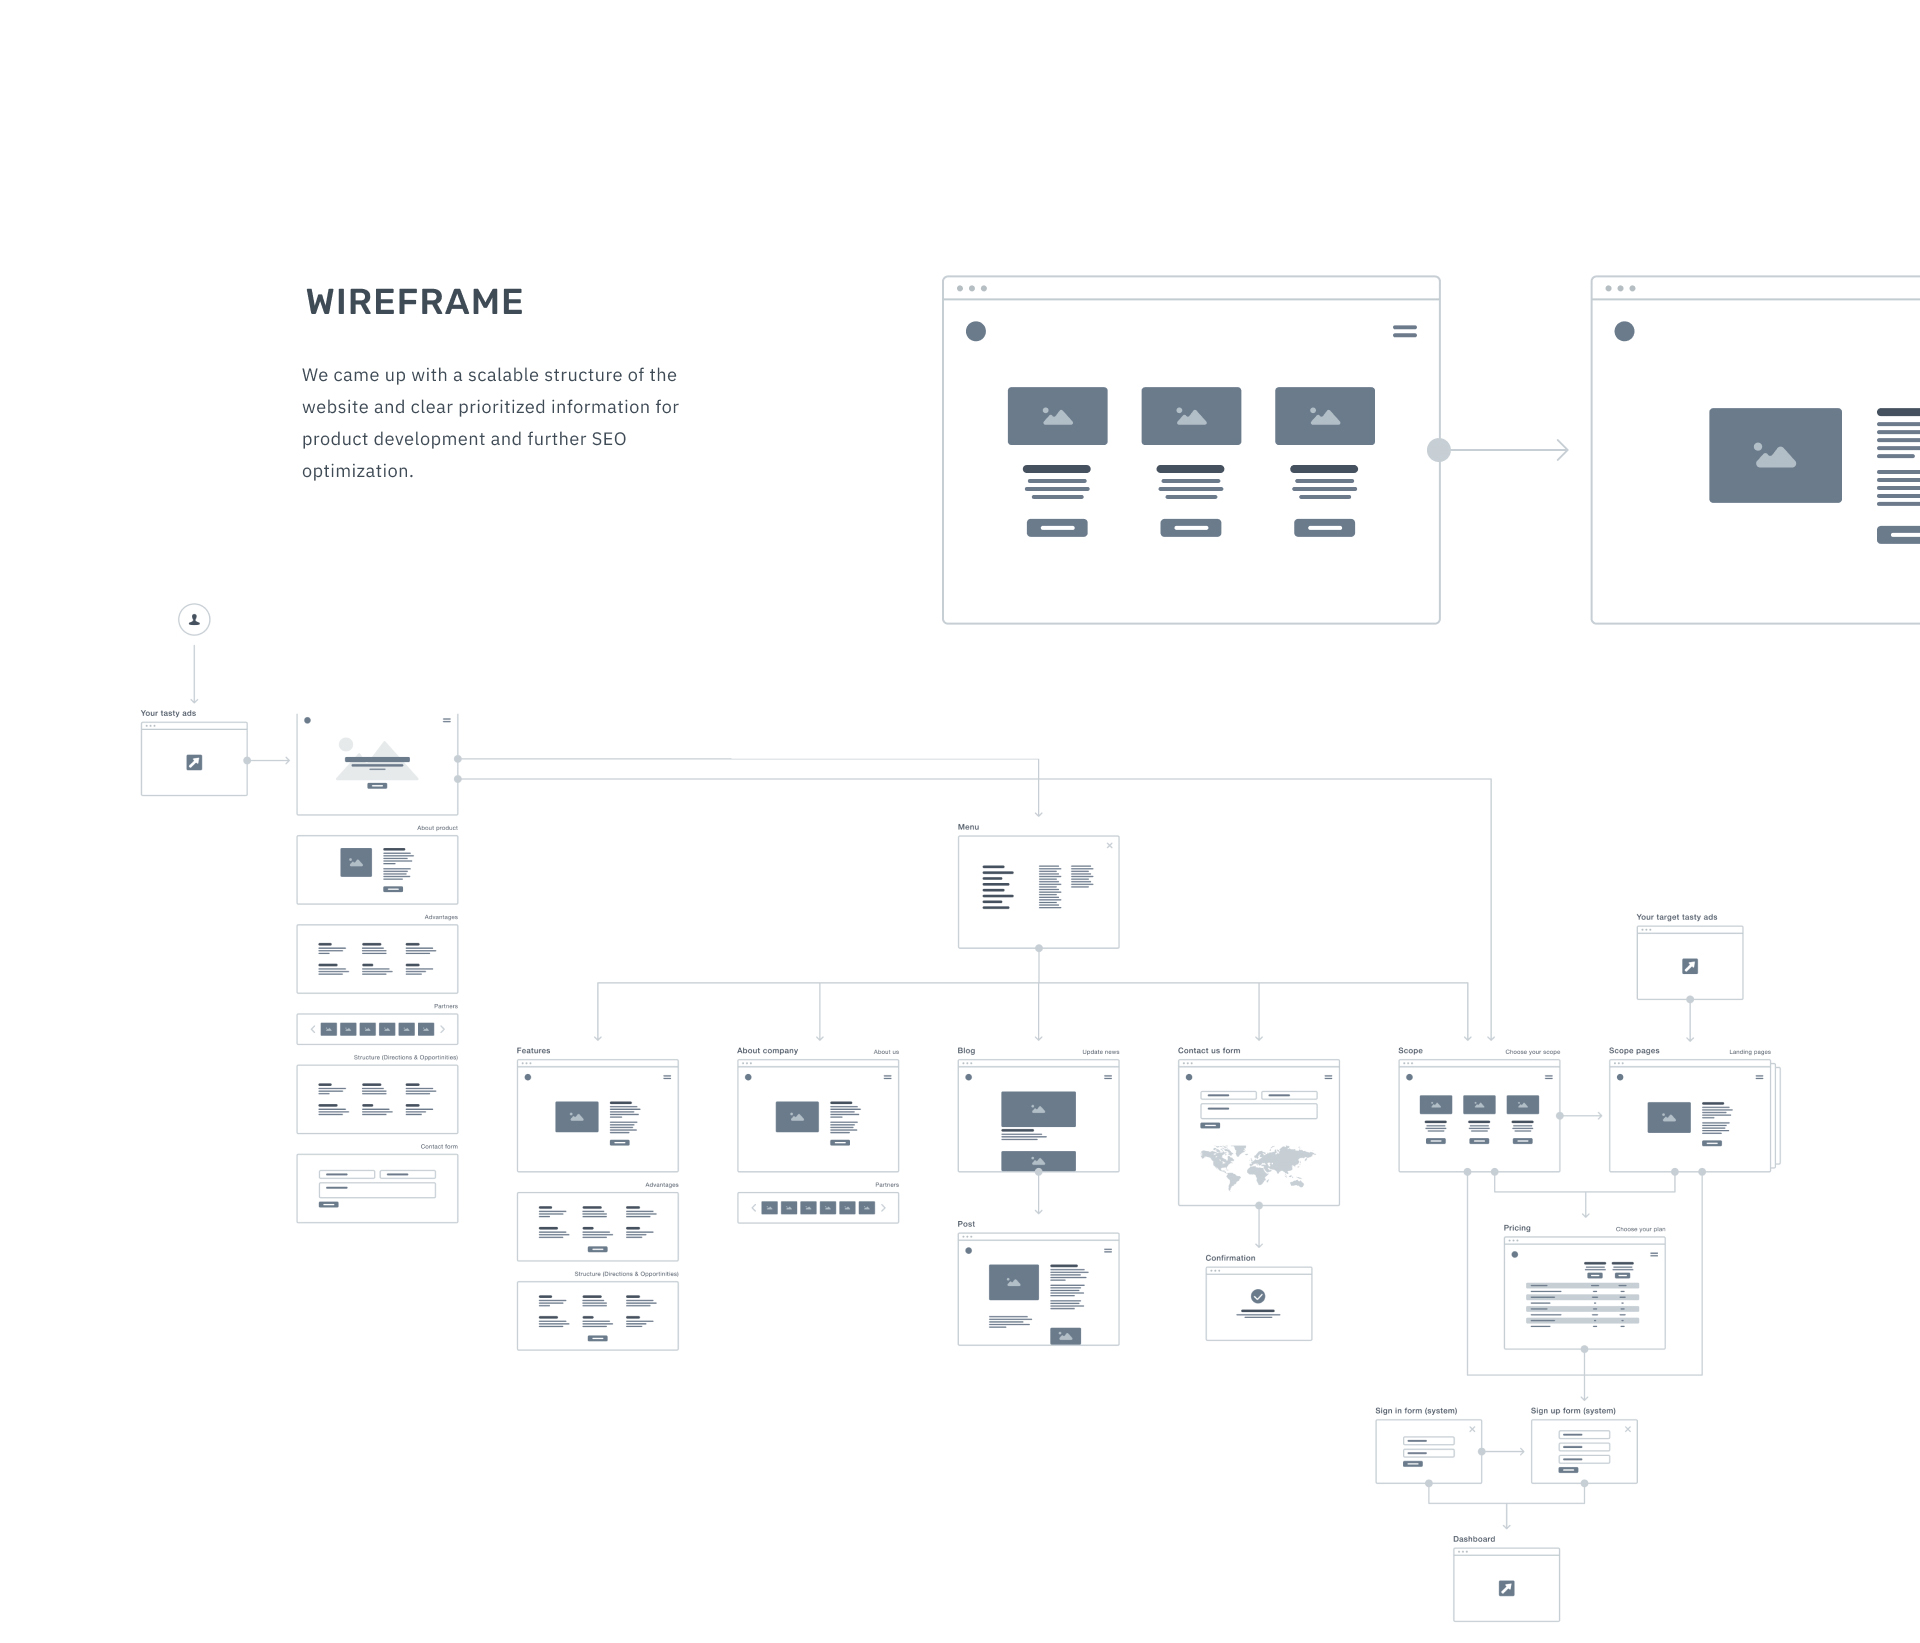 Scalable structure of the website and clear prioritized information for product development